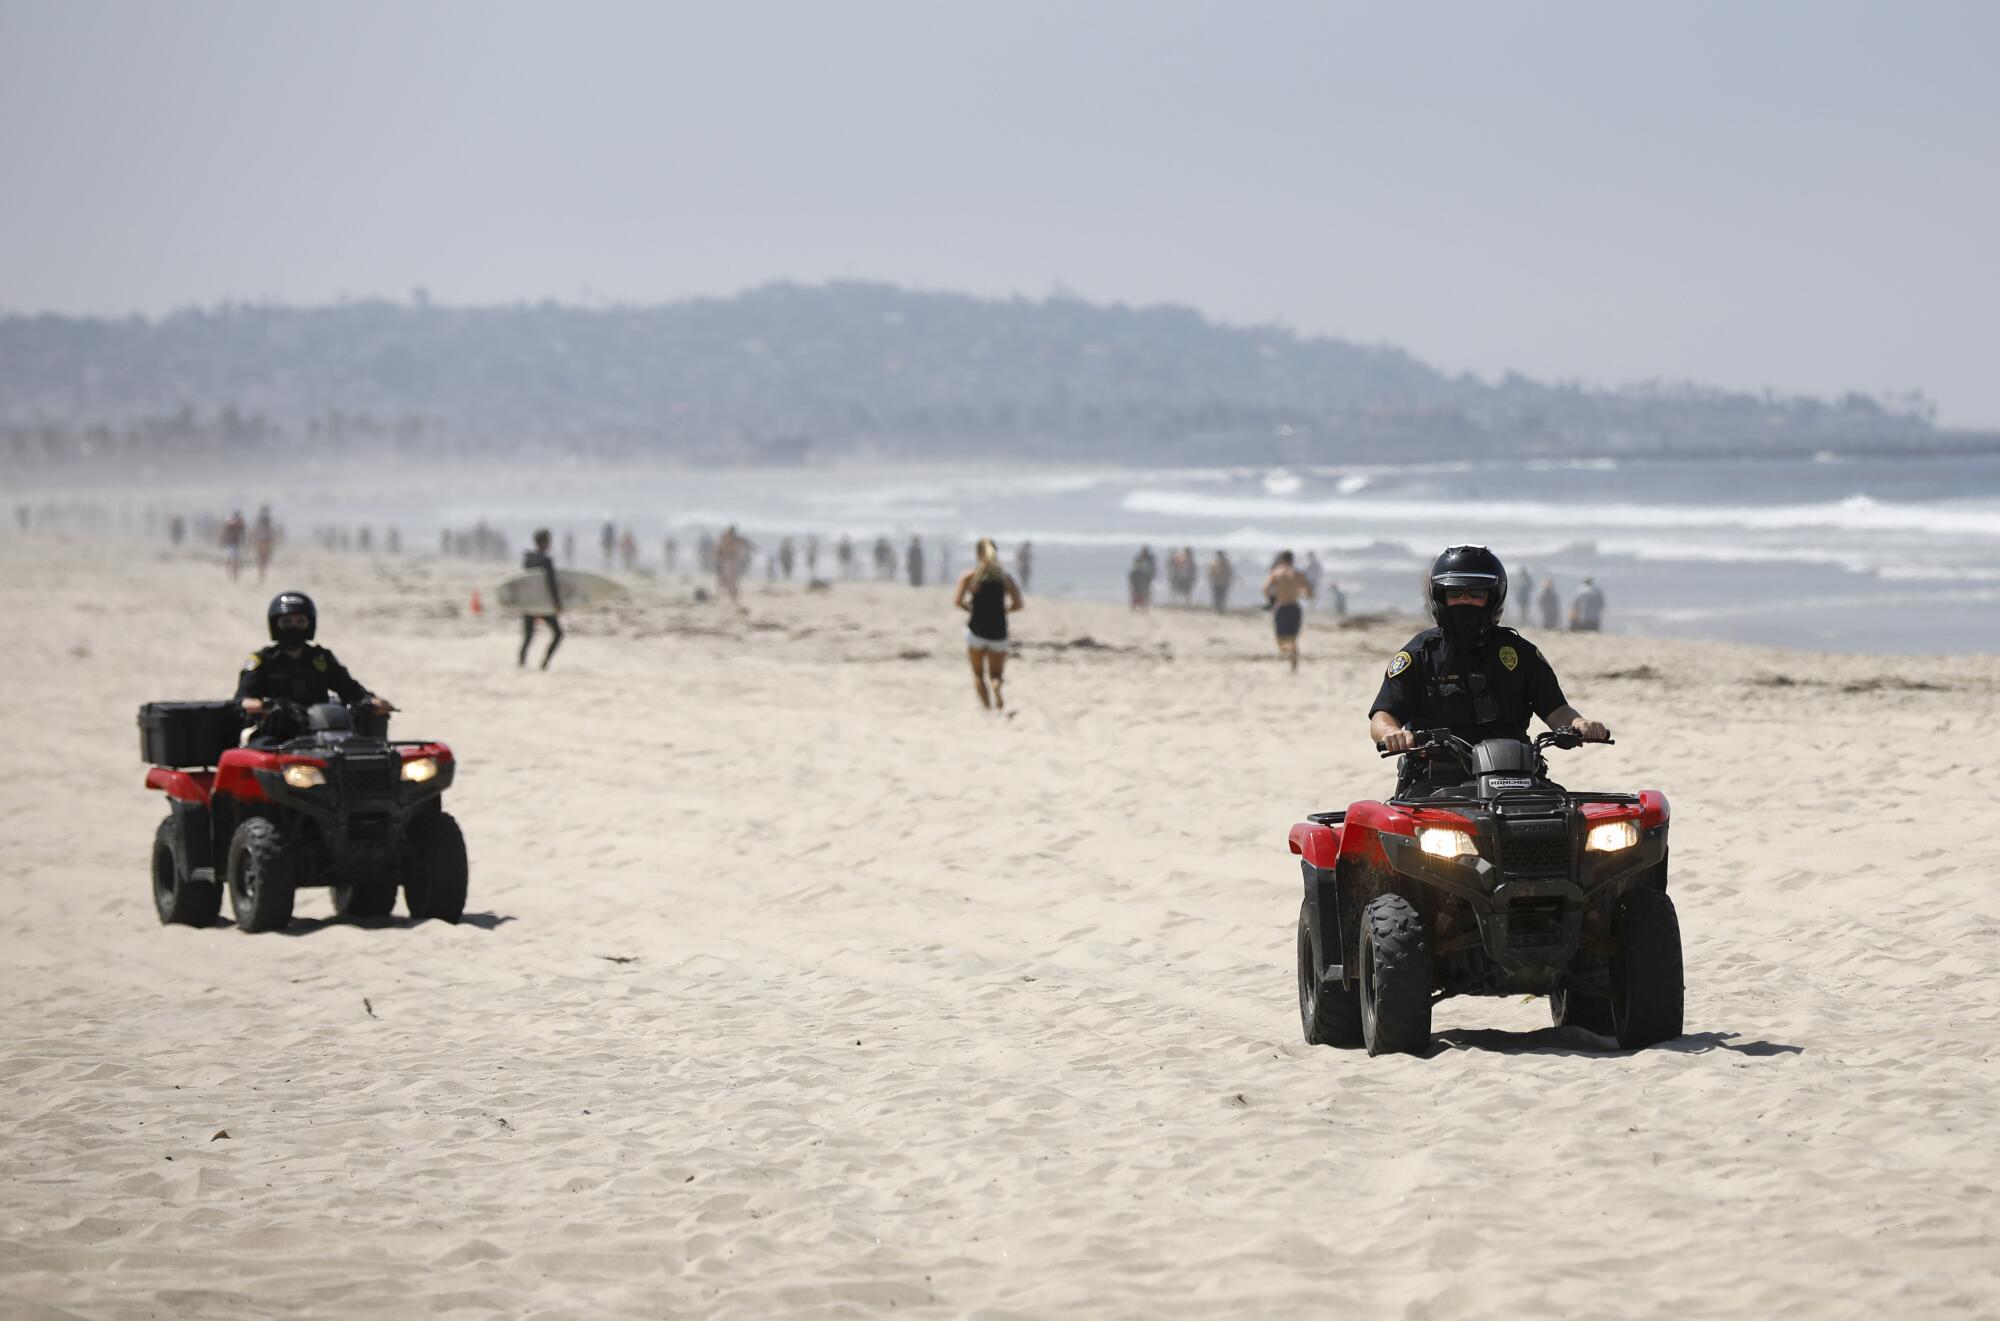 San Diego Police officers patrol Pacific Beach after local beaches reopened to activities such as walking, running, and surfing on April 27, 2020. Beaches have been closed for several weeks due to the coronavirus. The boardwalks and congregating on the sand are still prohibited.